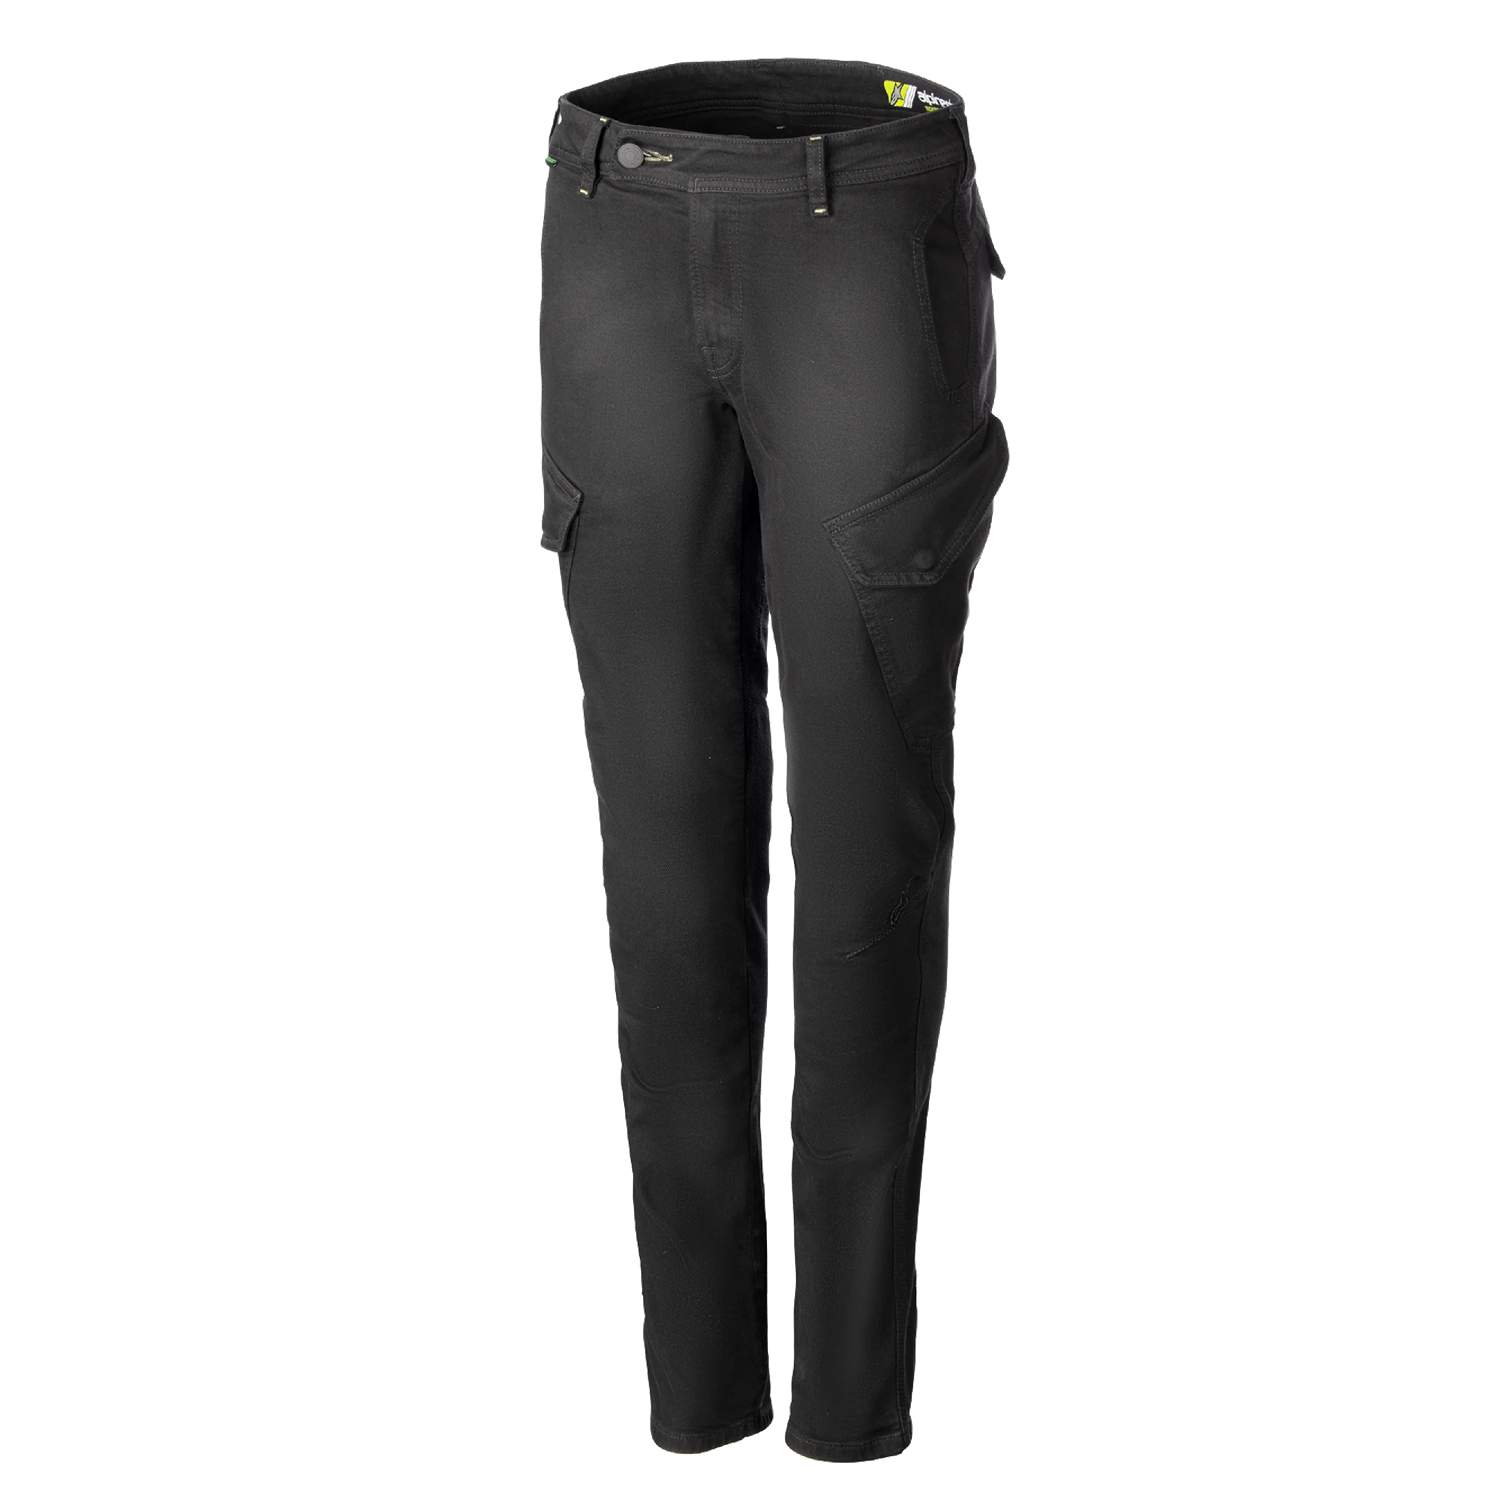 Image of Alpinestars Caliber Women's Tech Riding Pants Anthracite Taille 32